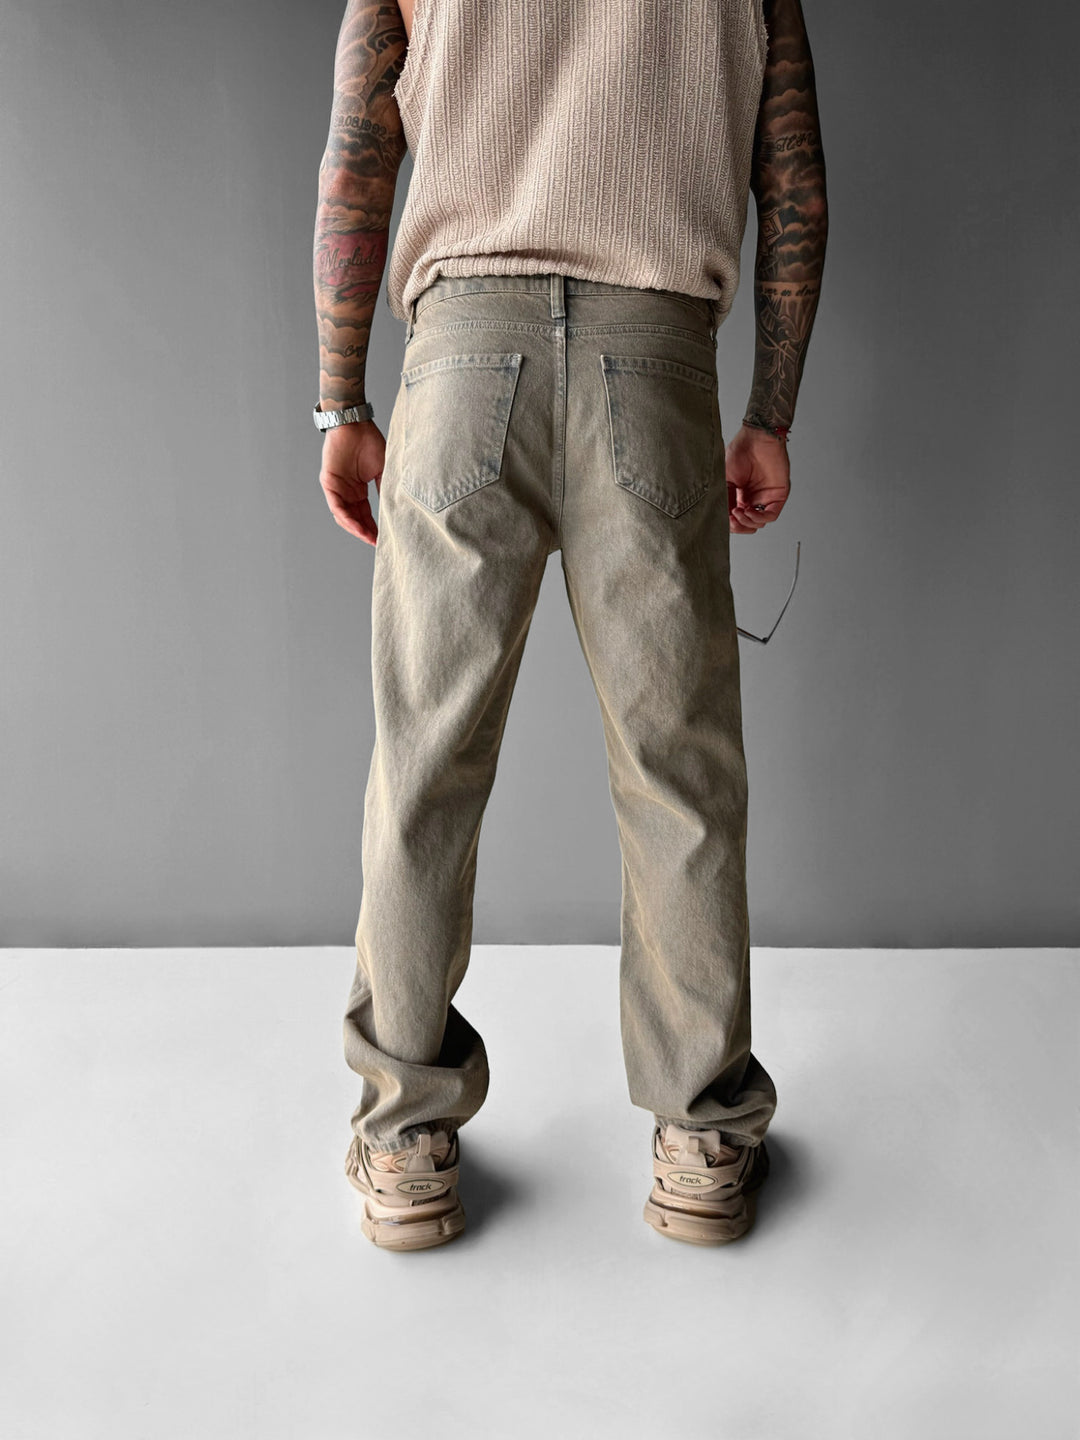 Baggy Washed Torn Jeans - Rusty